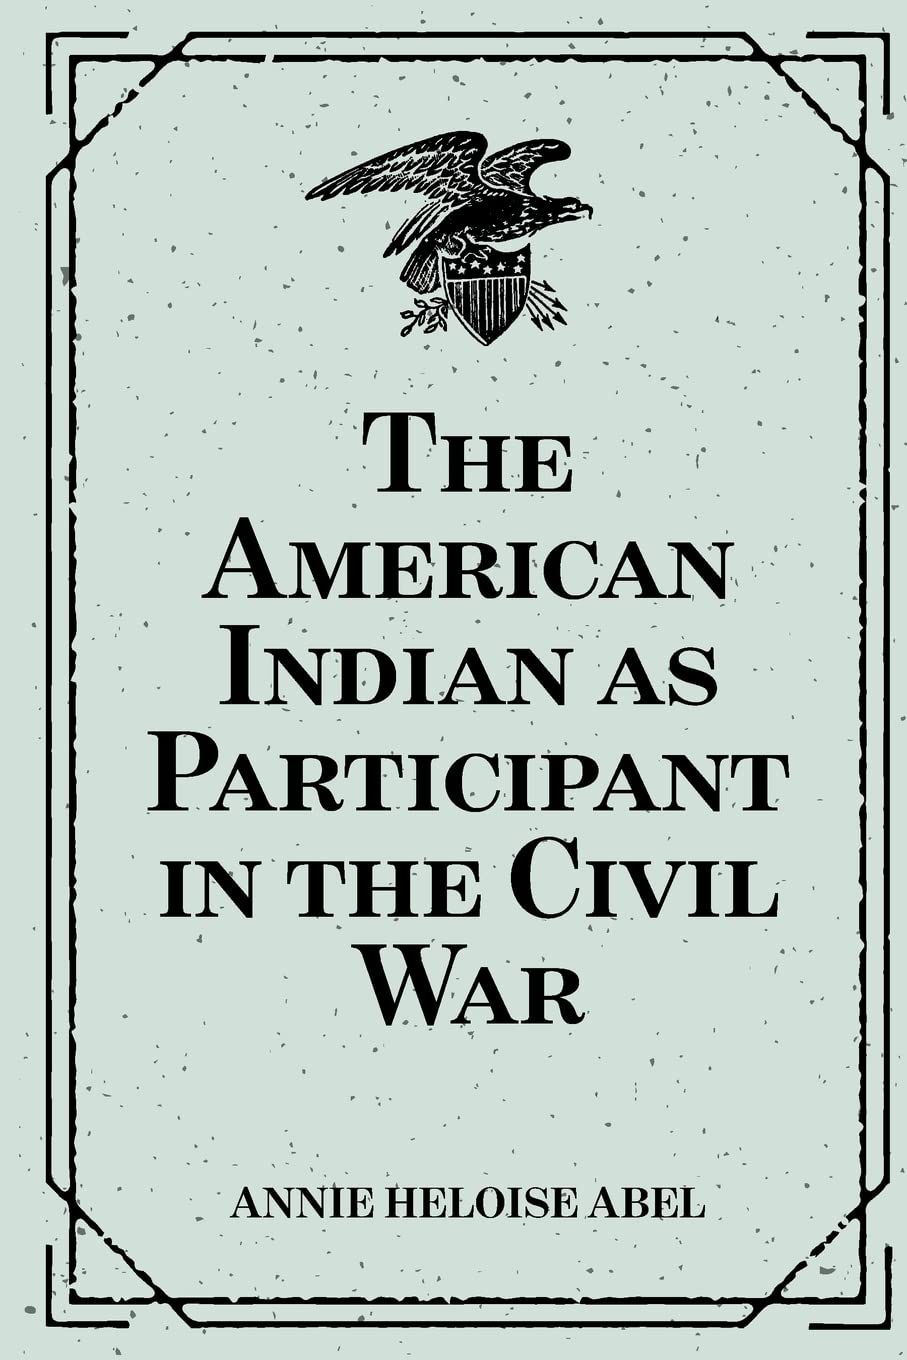 The American Indian as Particip - Annie Heloise Abel